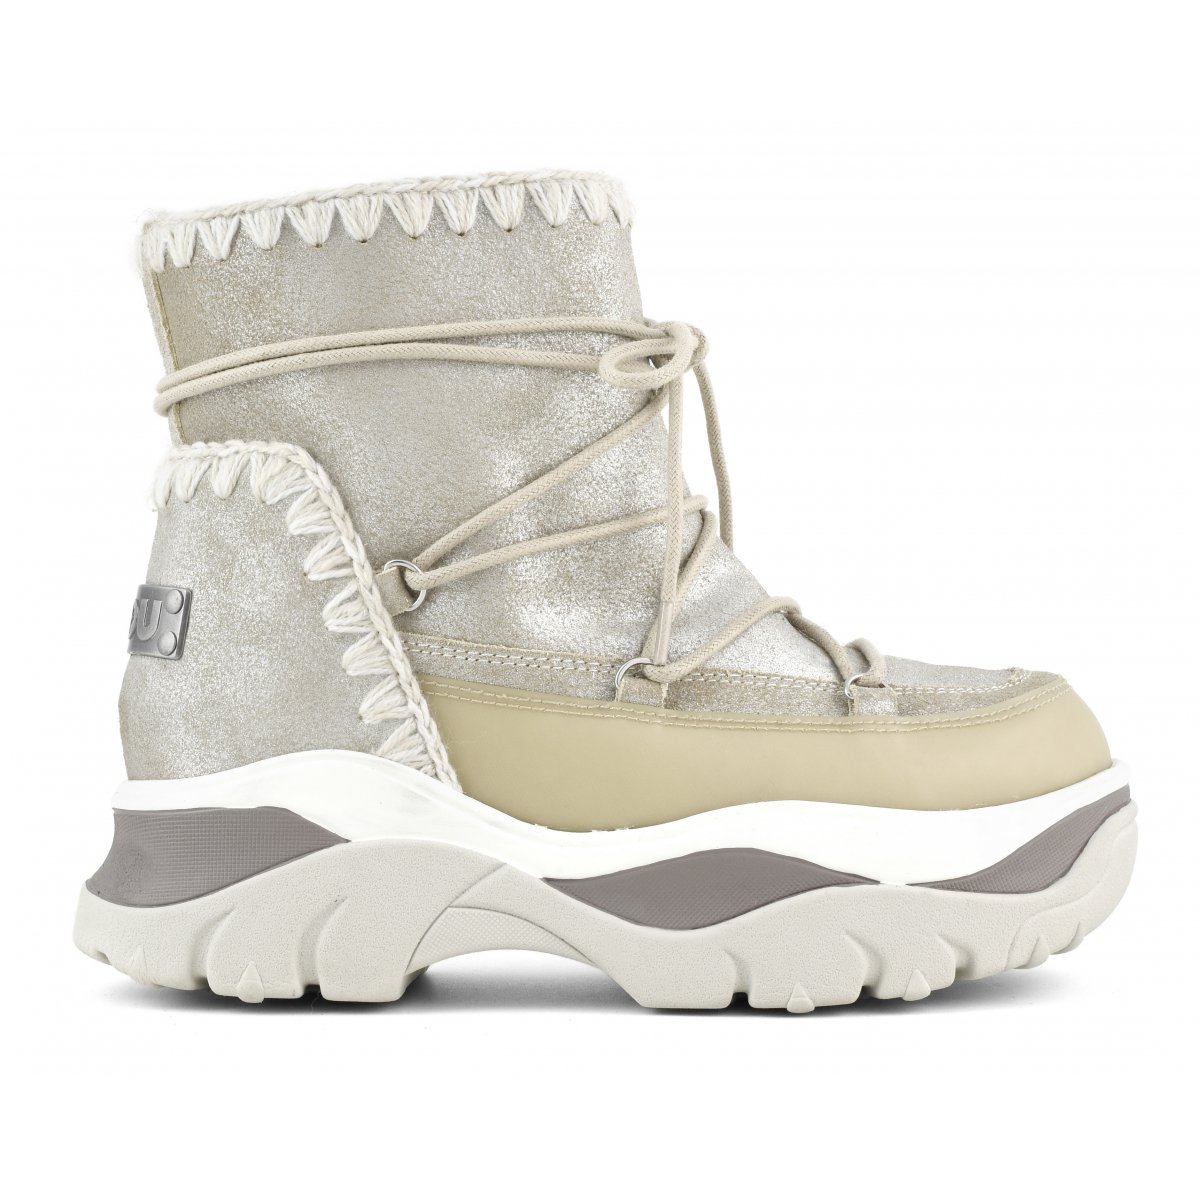 Chunky sneaker lace up boot STME img 1